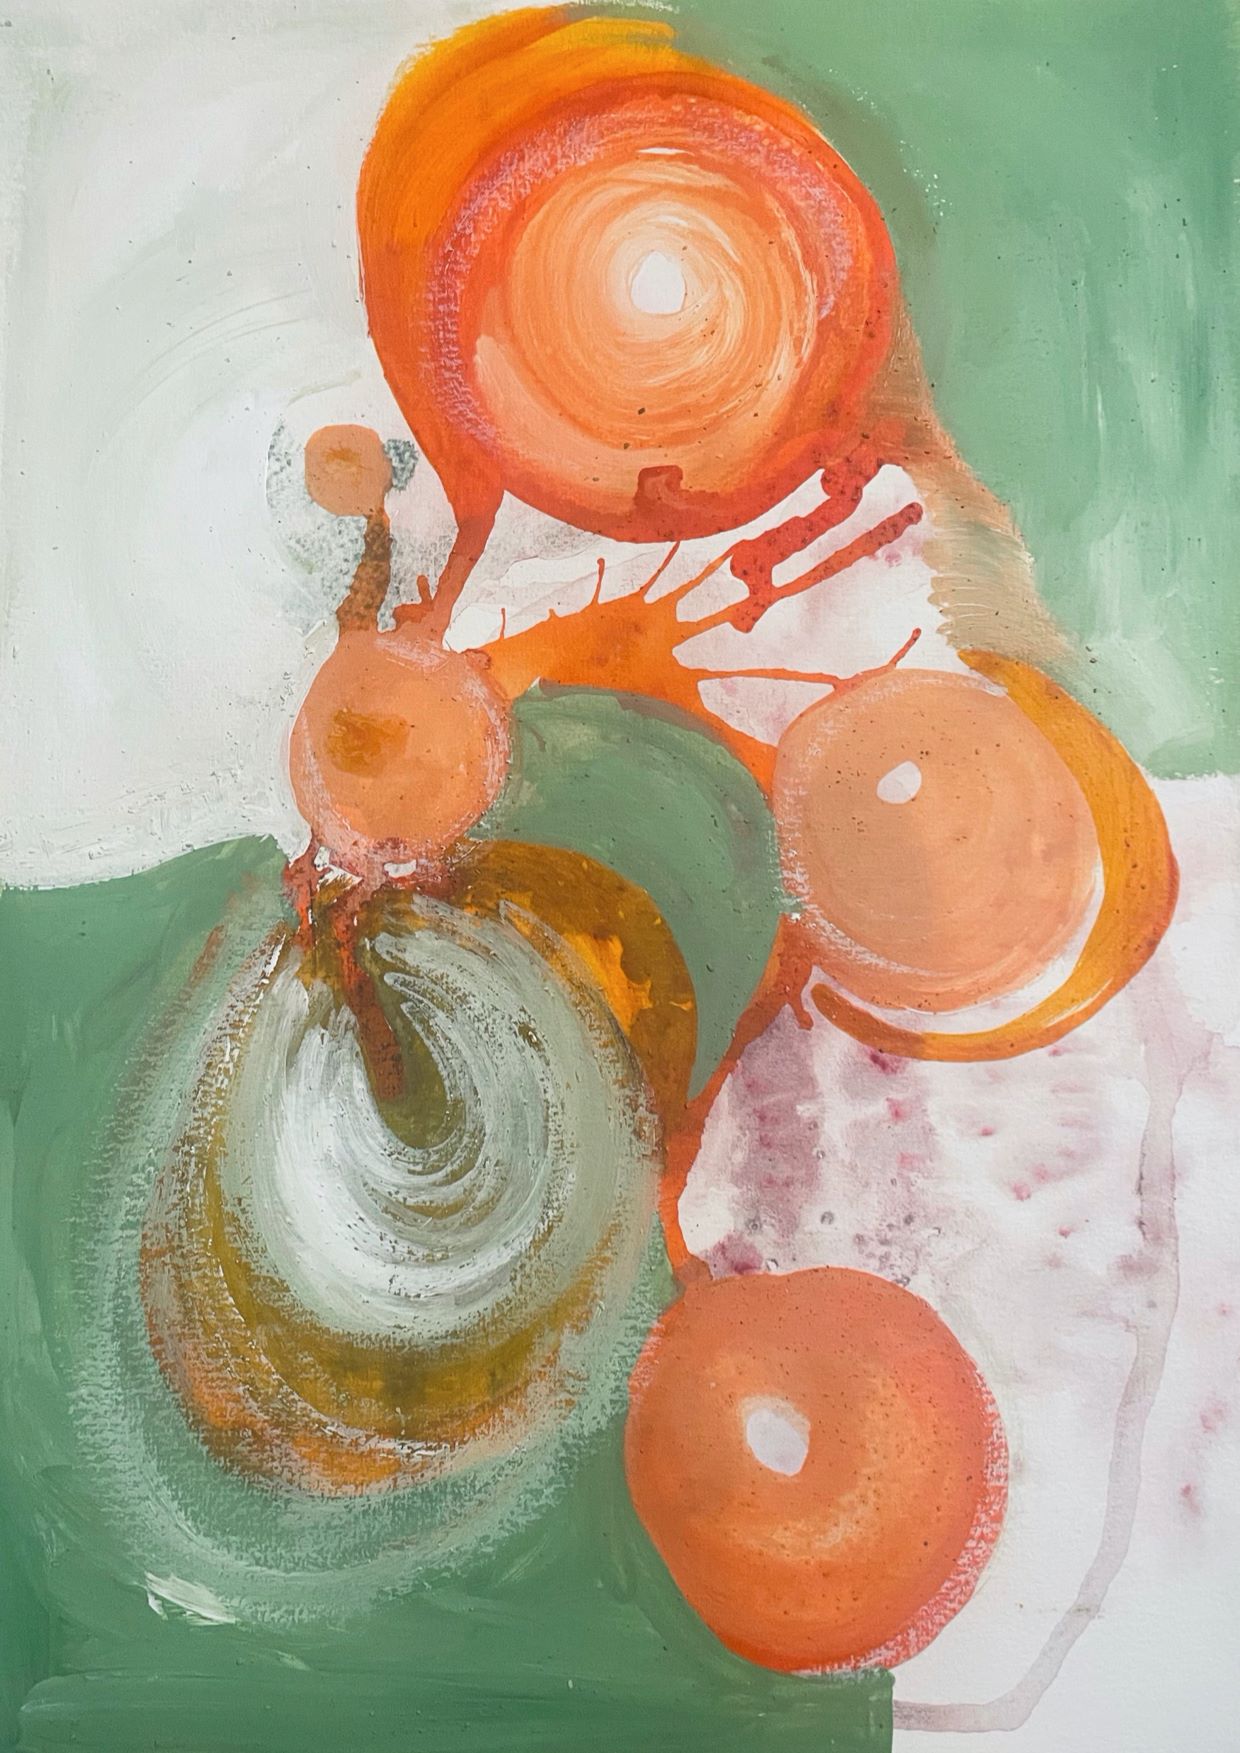 Green and orange painting with circles and swirls